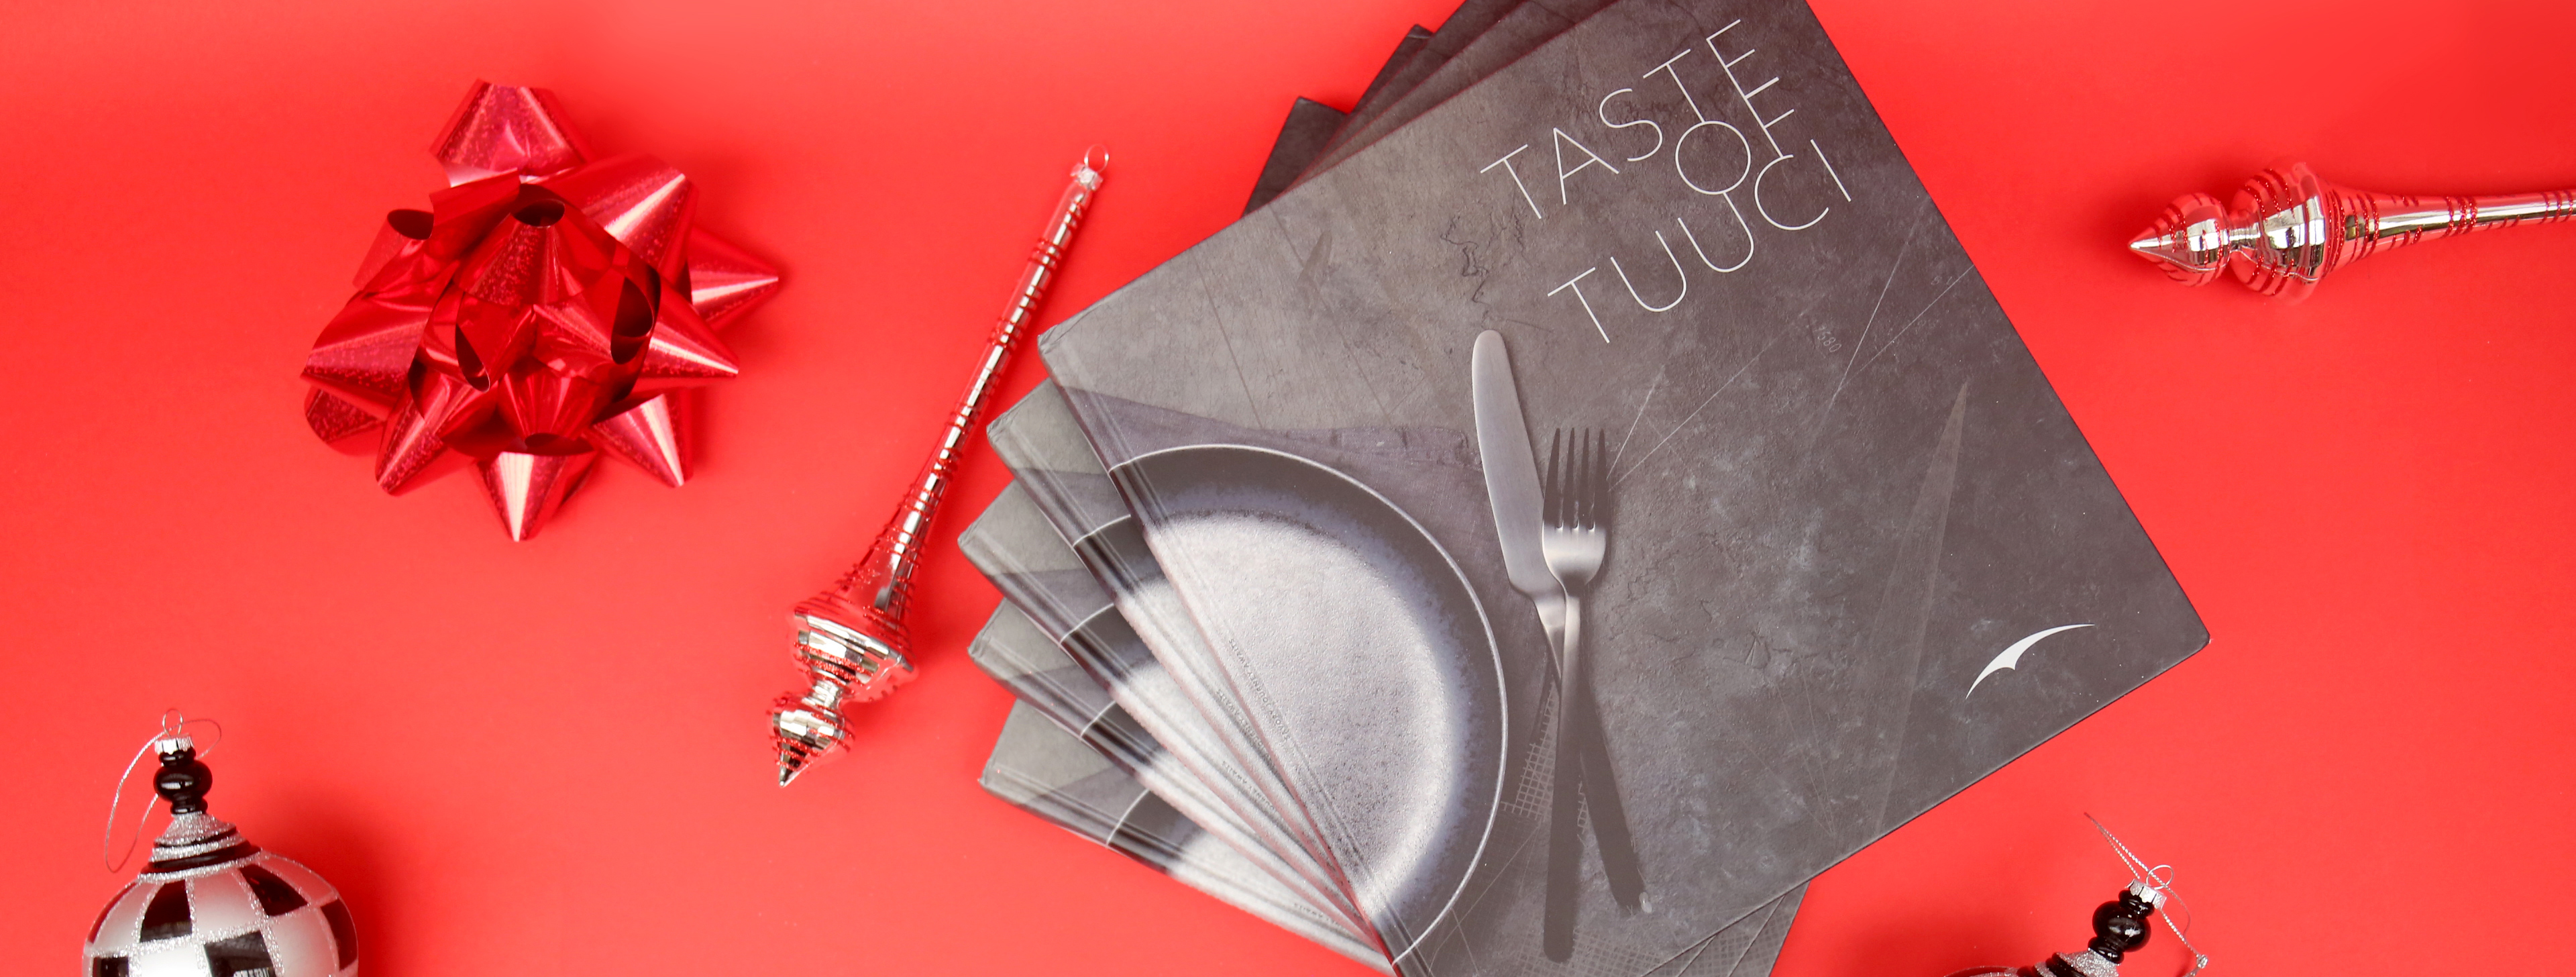 Taste of Tuuci cookbooks on a red background with holiday ornaments